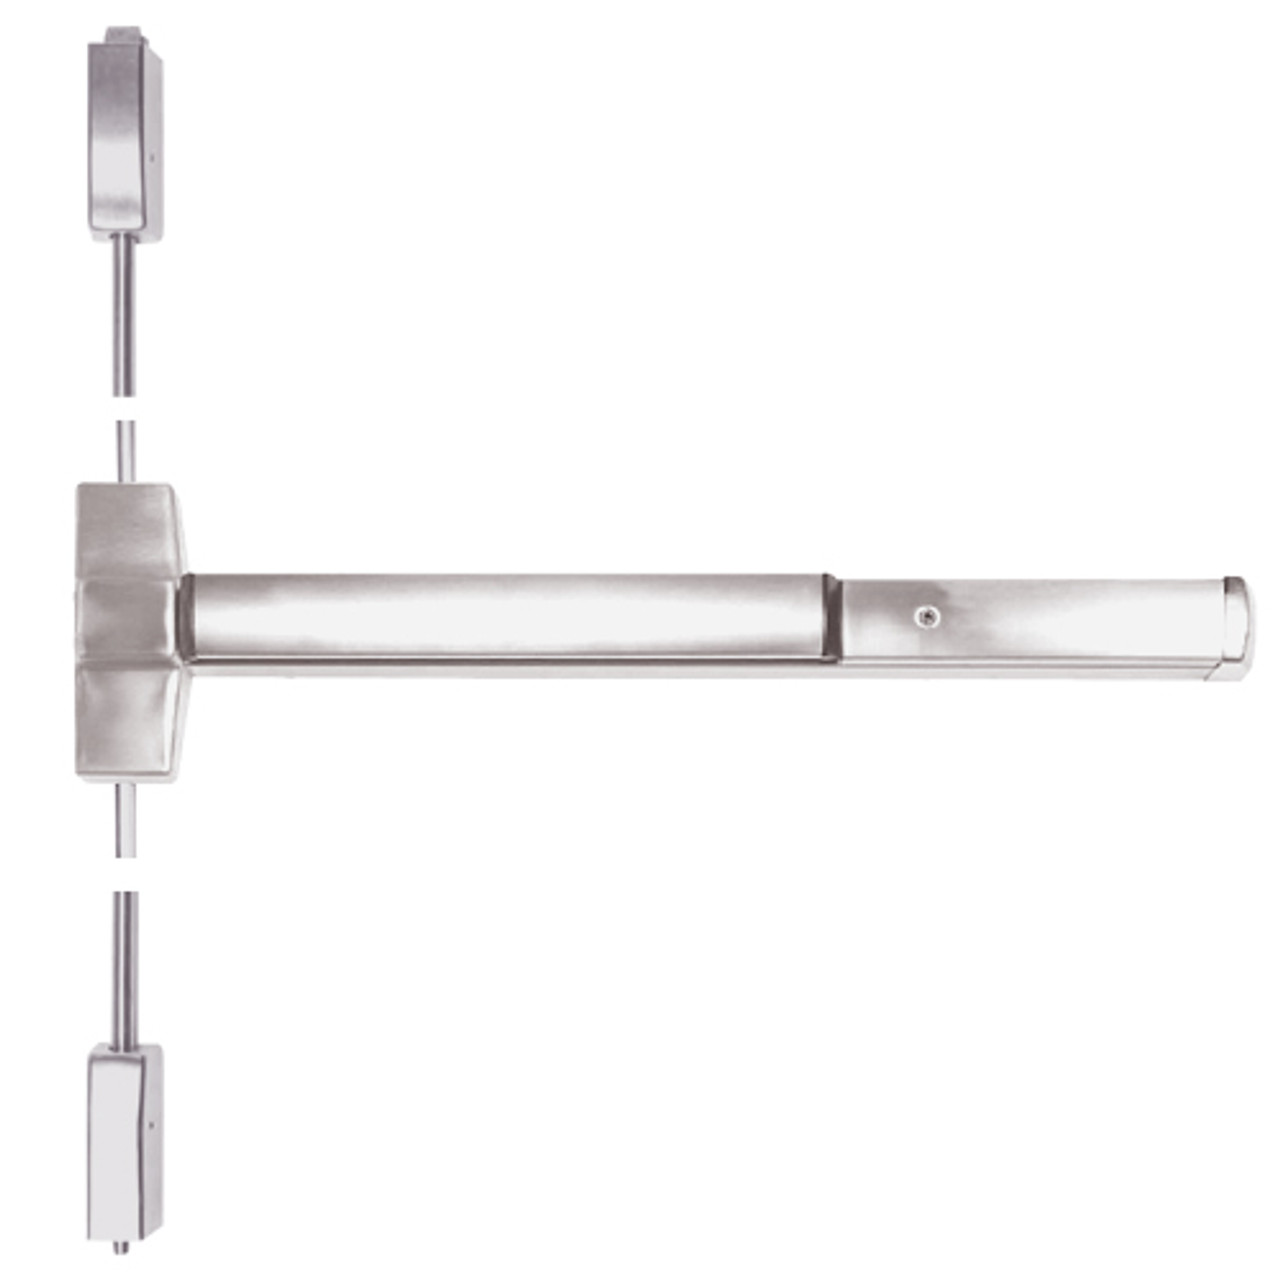 ED5470-630-W048 Corbin ED5400 Series Non Fire Rated Vertical Rod Exit Device in Satin Stainless Steel Finish